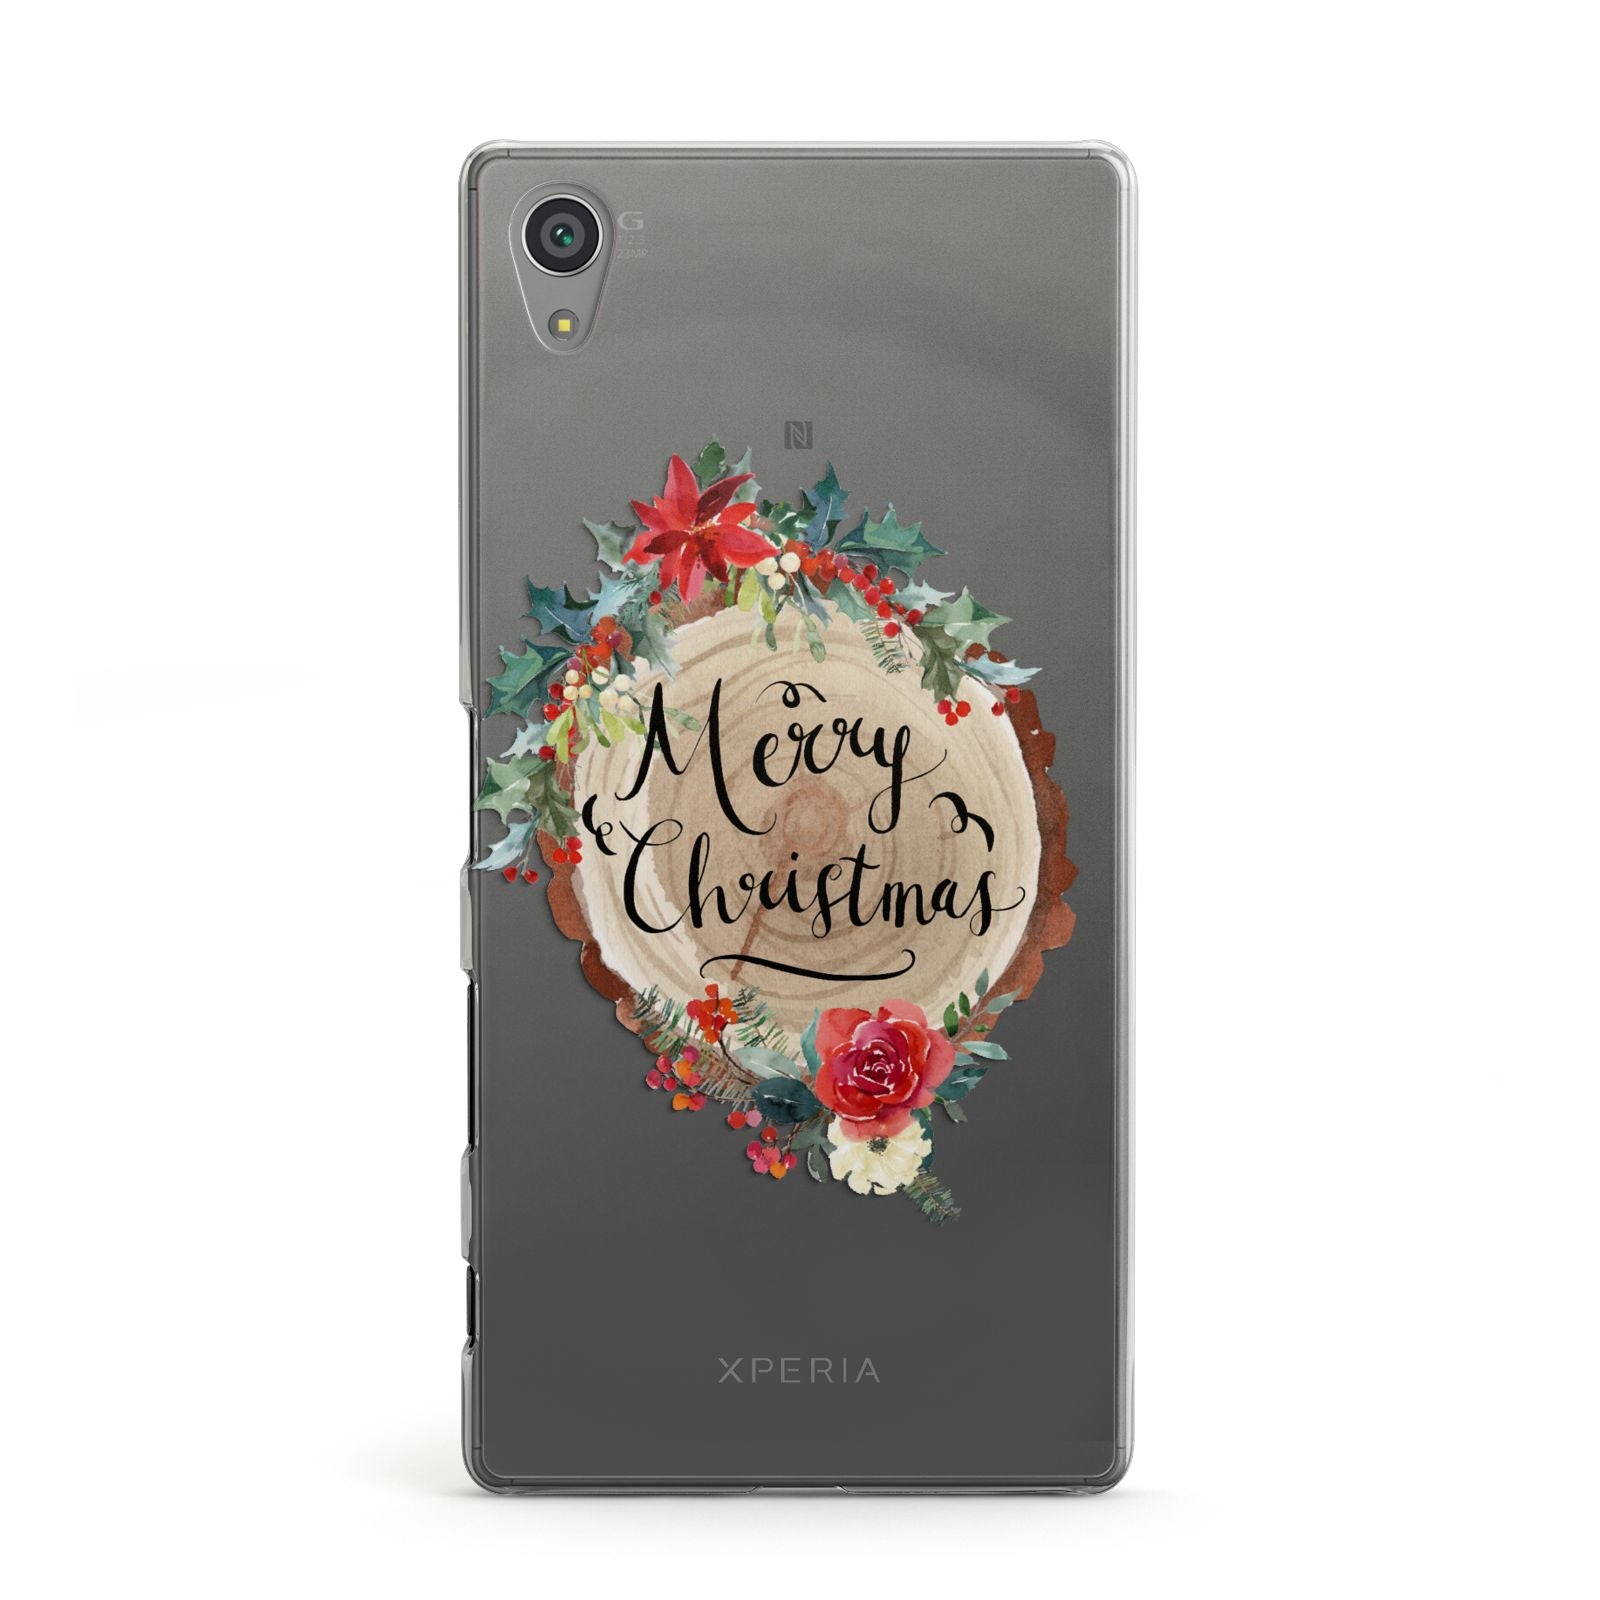 Merry Christmas Log Floral Sony Xperia Case